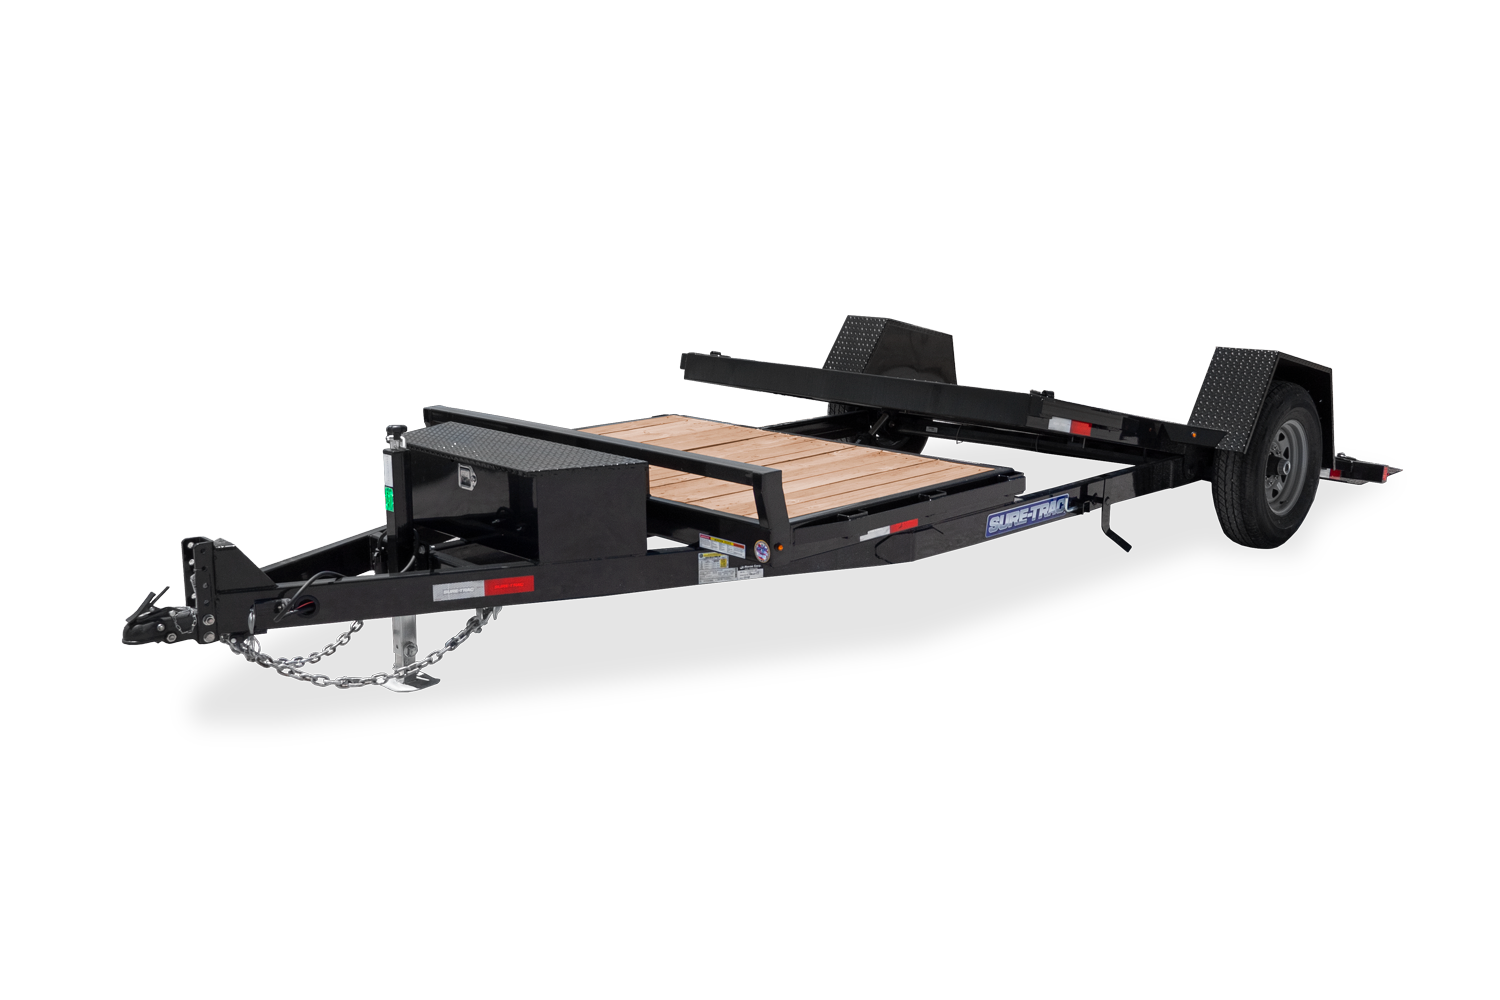 Front View of the Single Axle Tilt Bed Equipment with a 4 foot stationary deck tilted